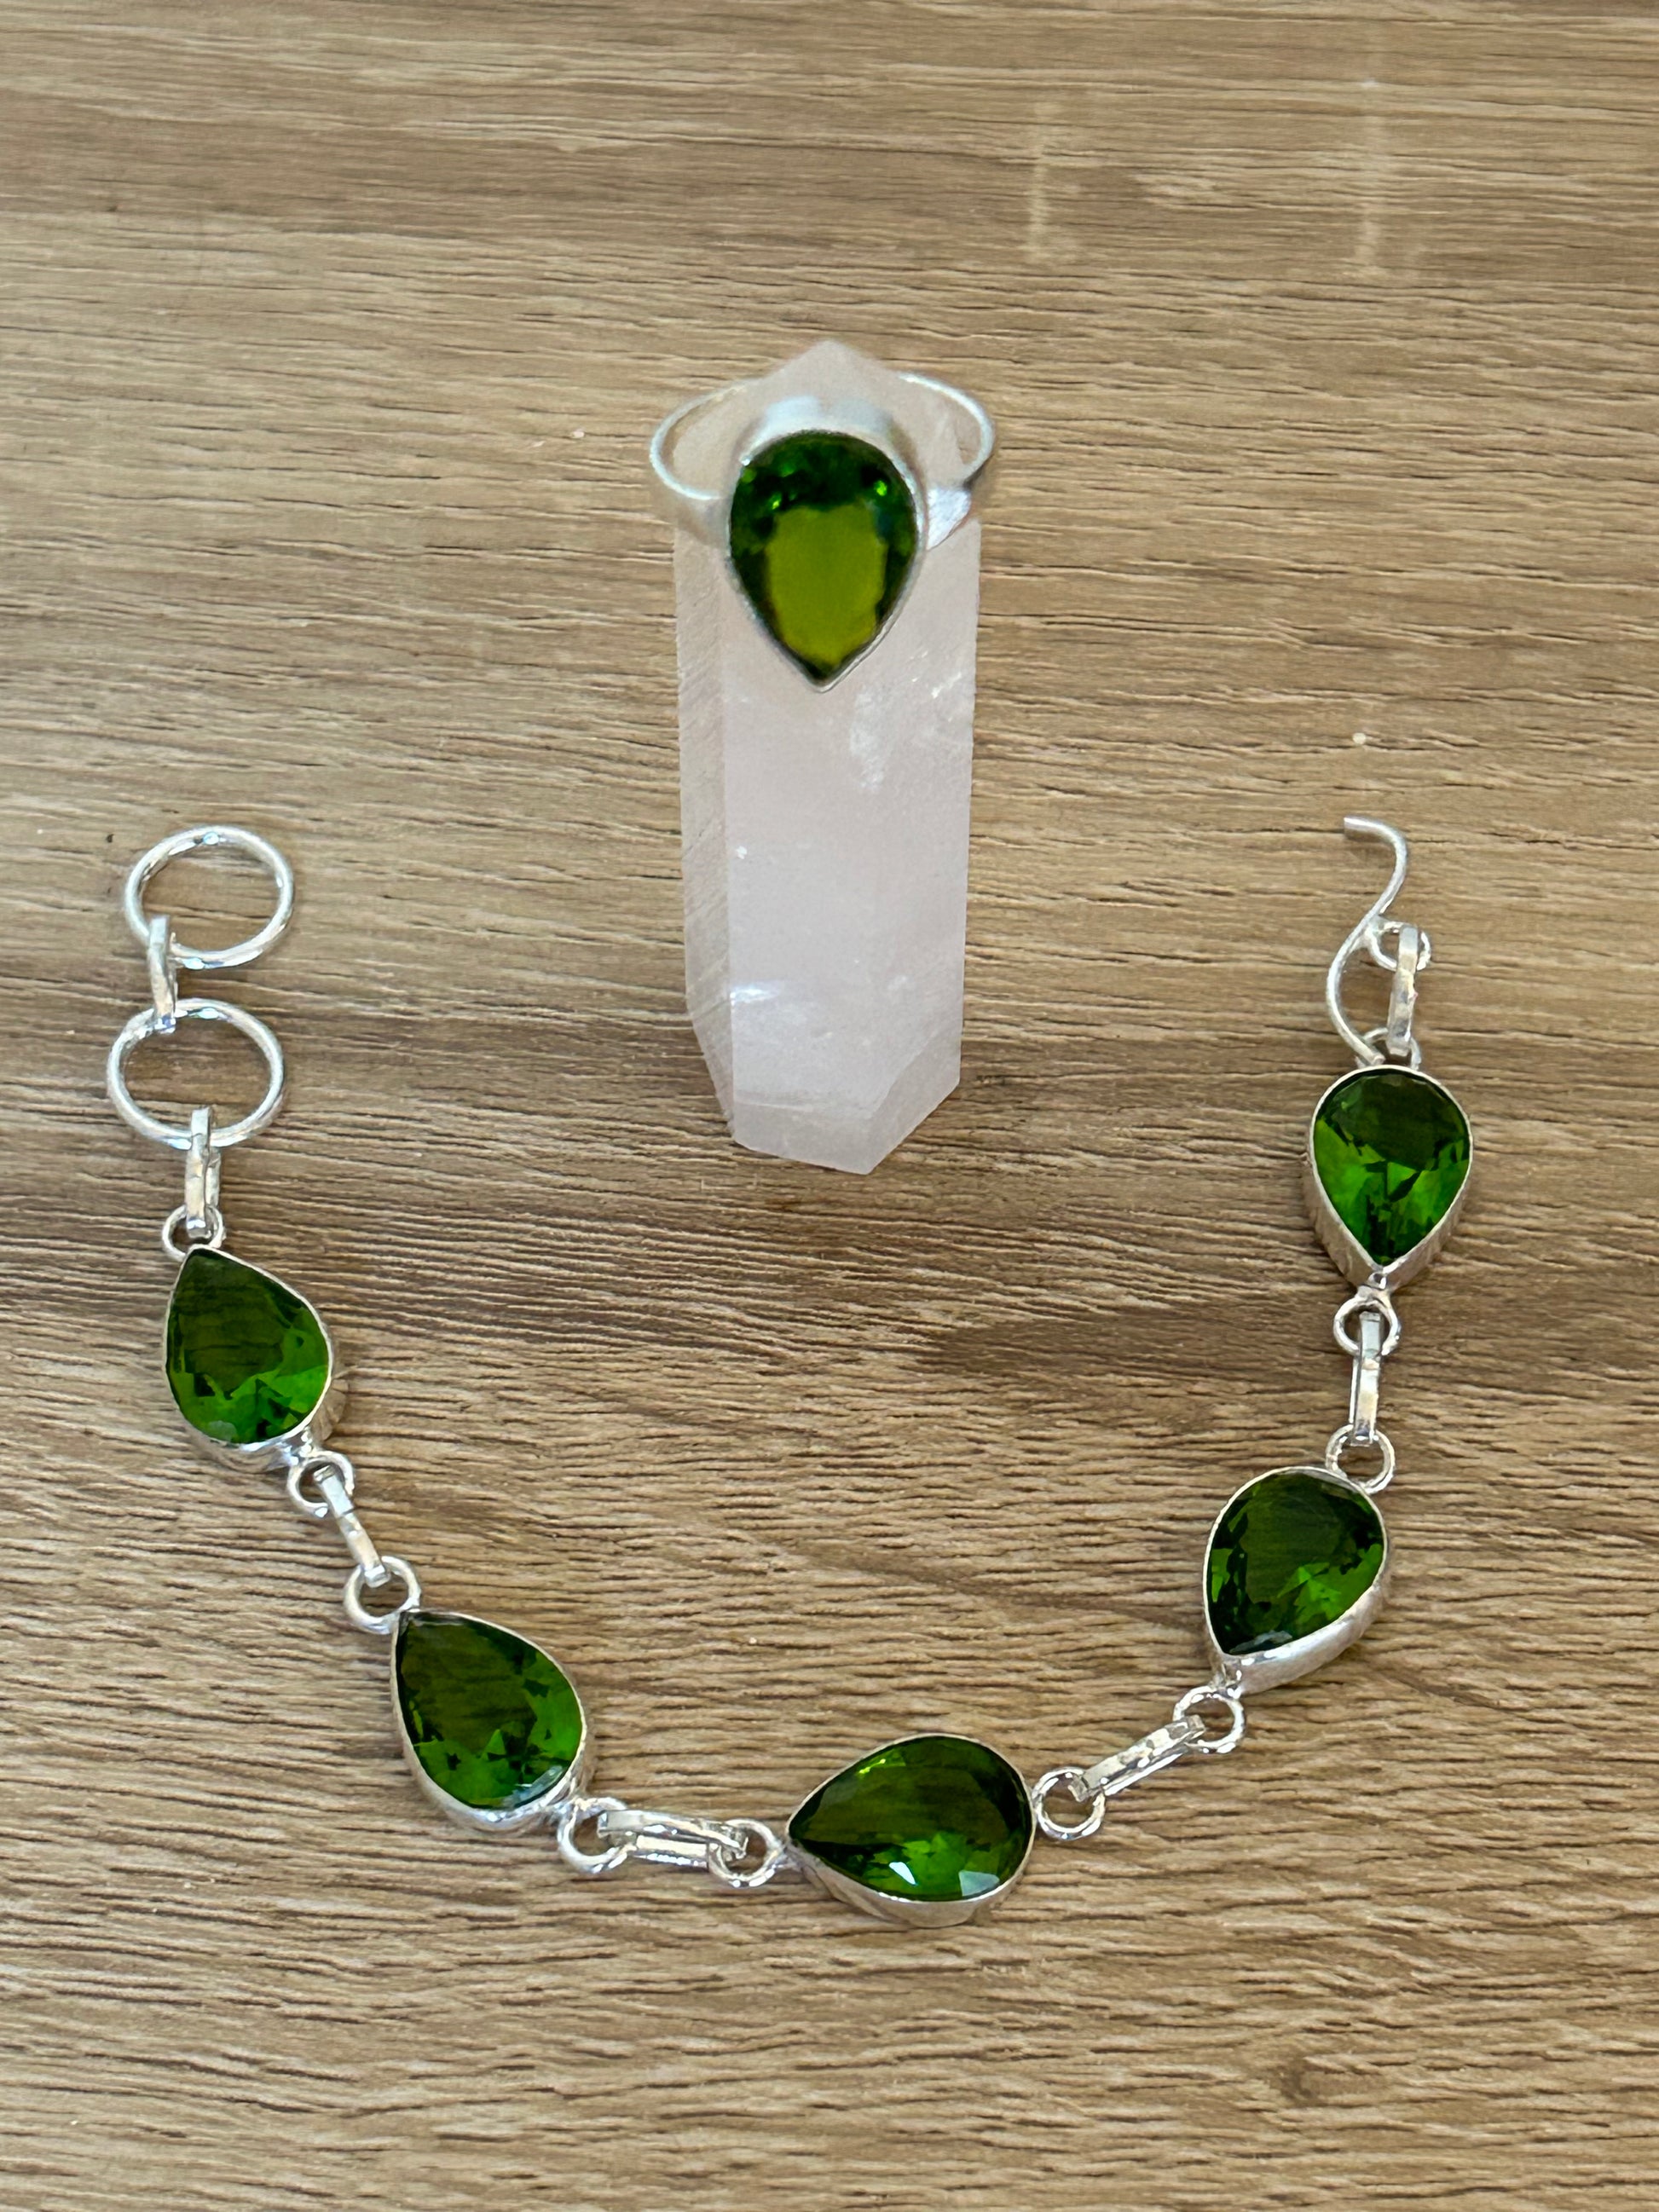 Green Peridot and 925 Sterling Silver Bracelet and Ring Set. The bracelet has 6 faceted water drop cut gems and the ring has one